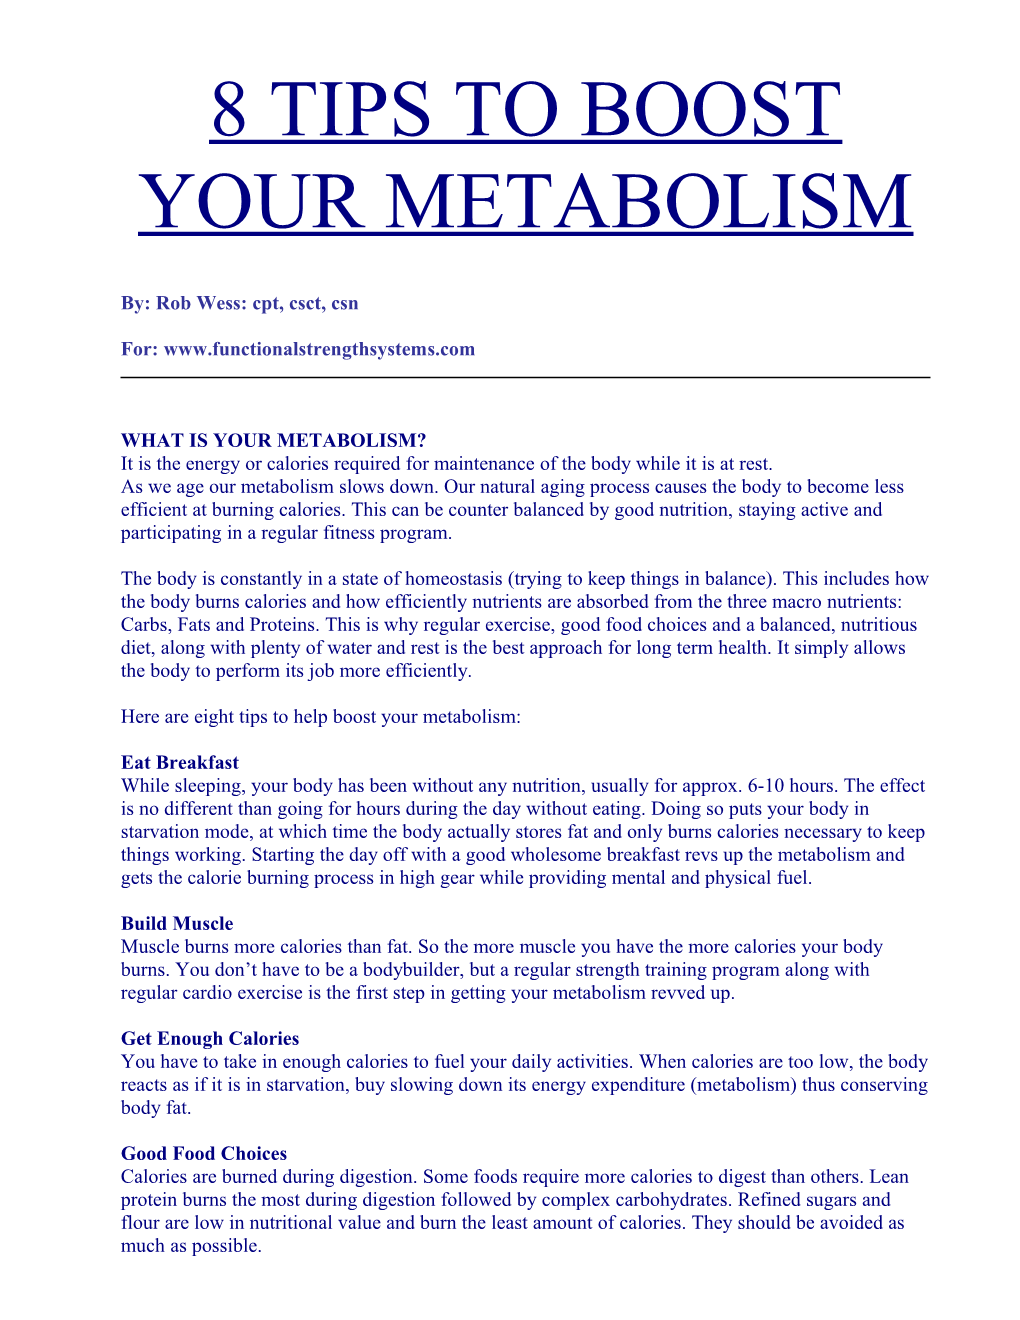 Tips to Boost Your Metbolism